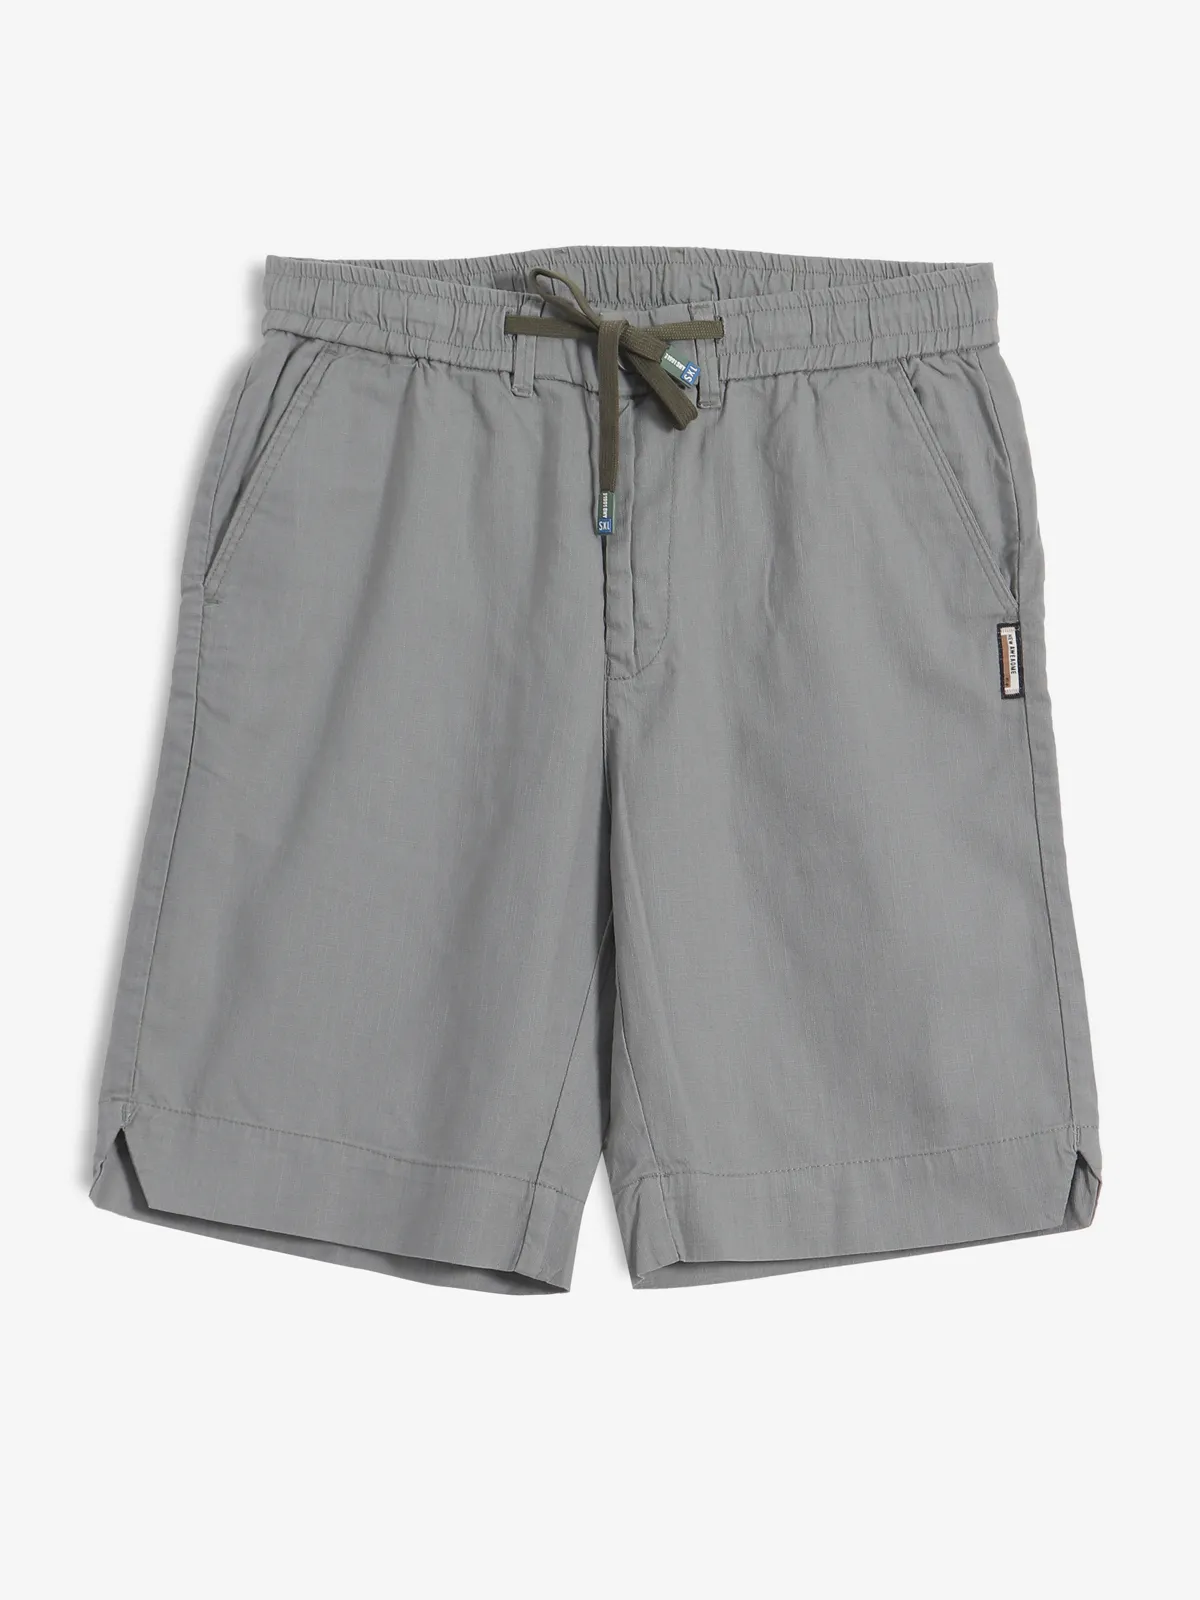 GS78 cotton shorts in solid grey